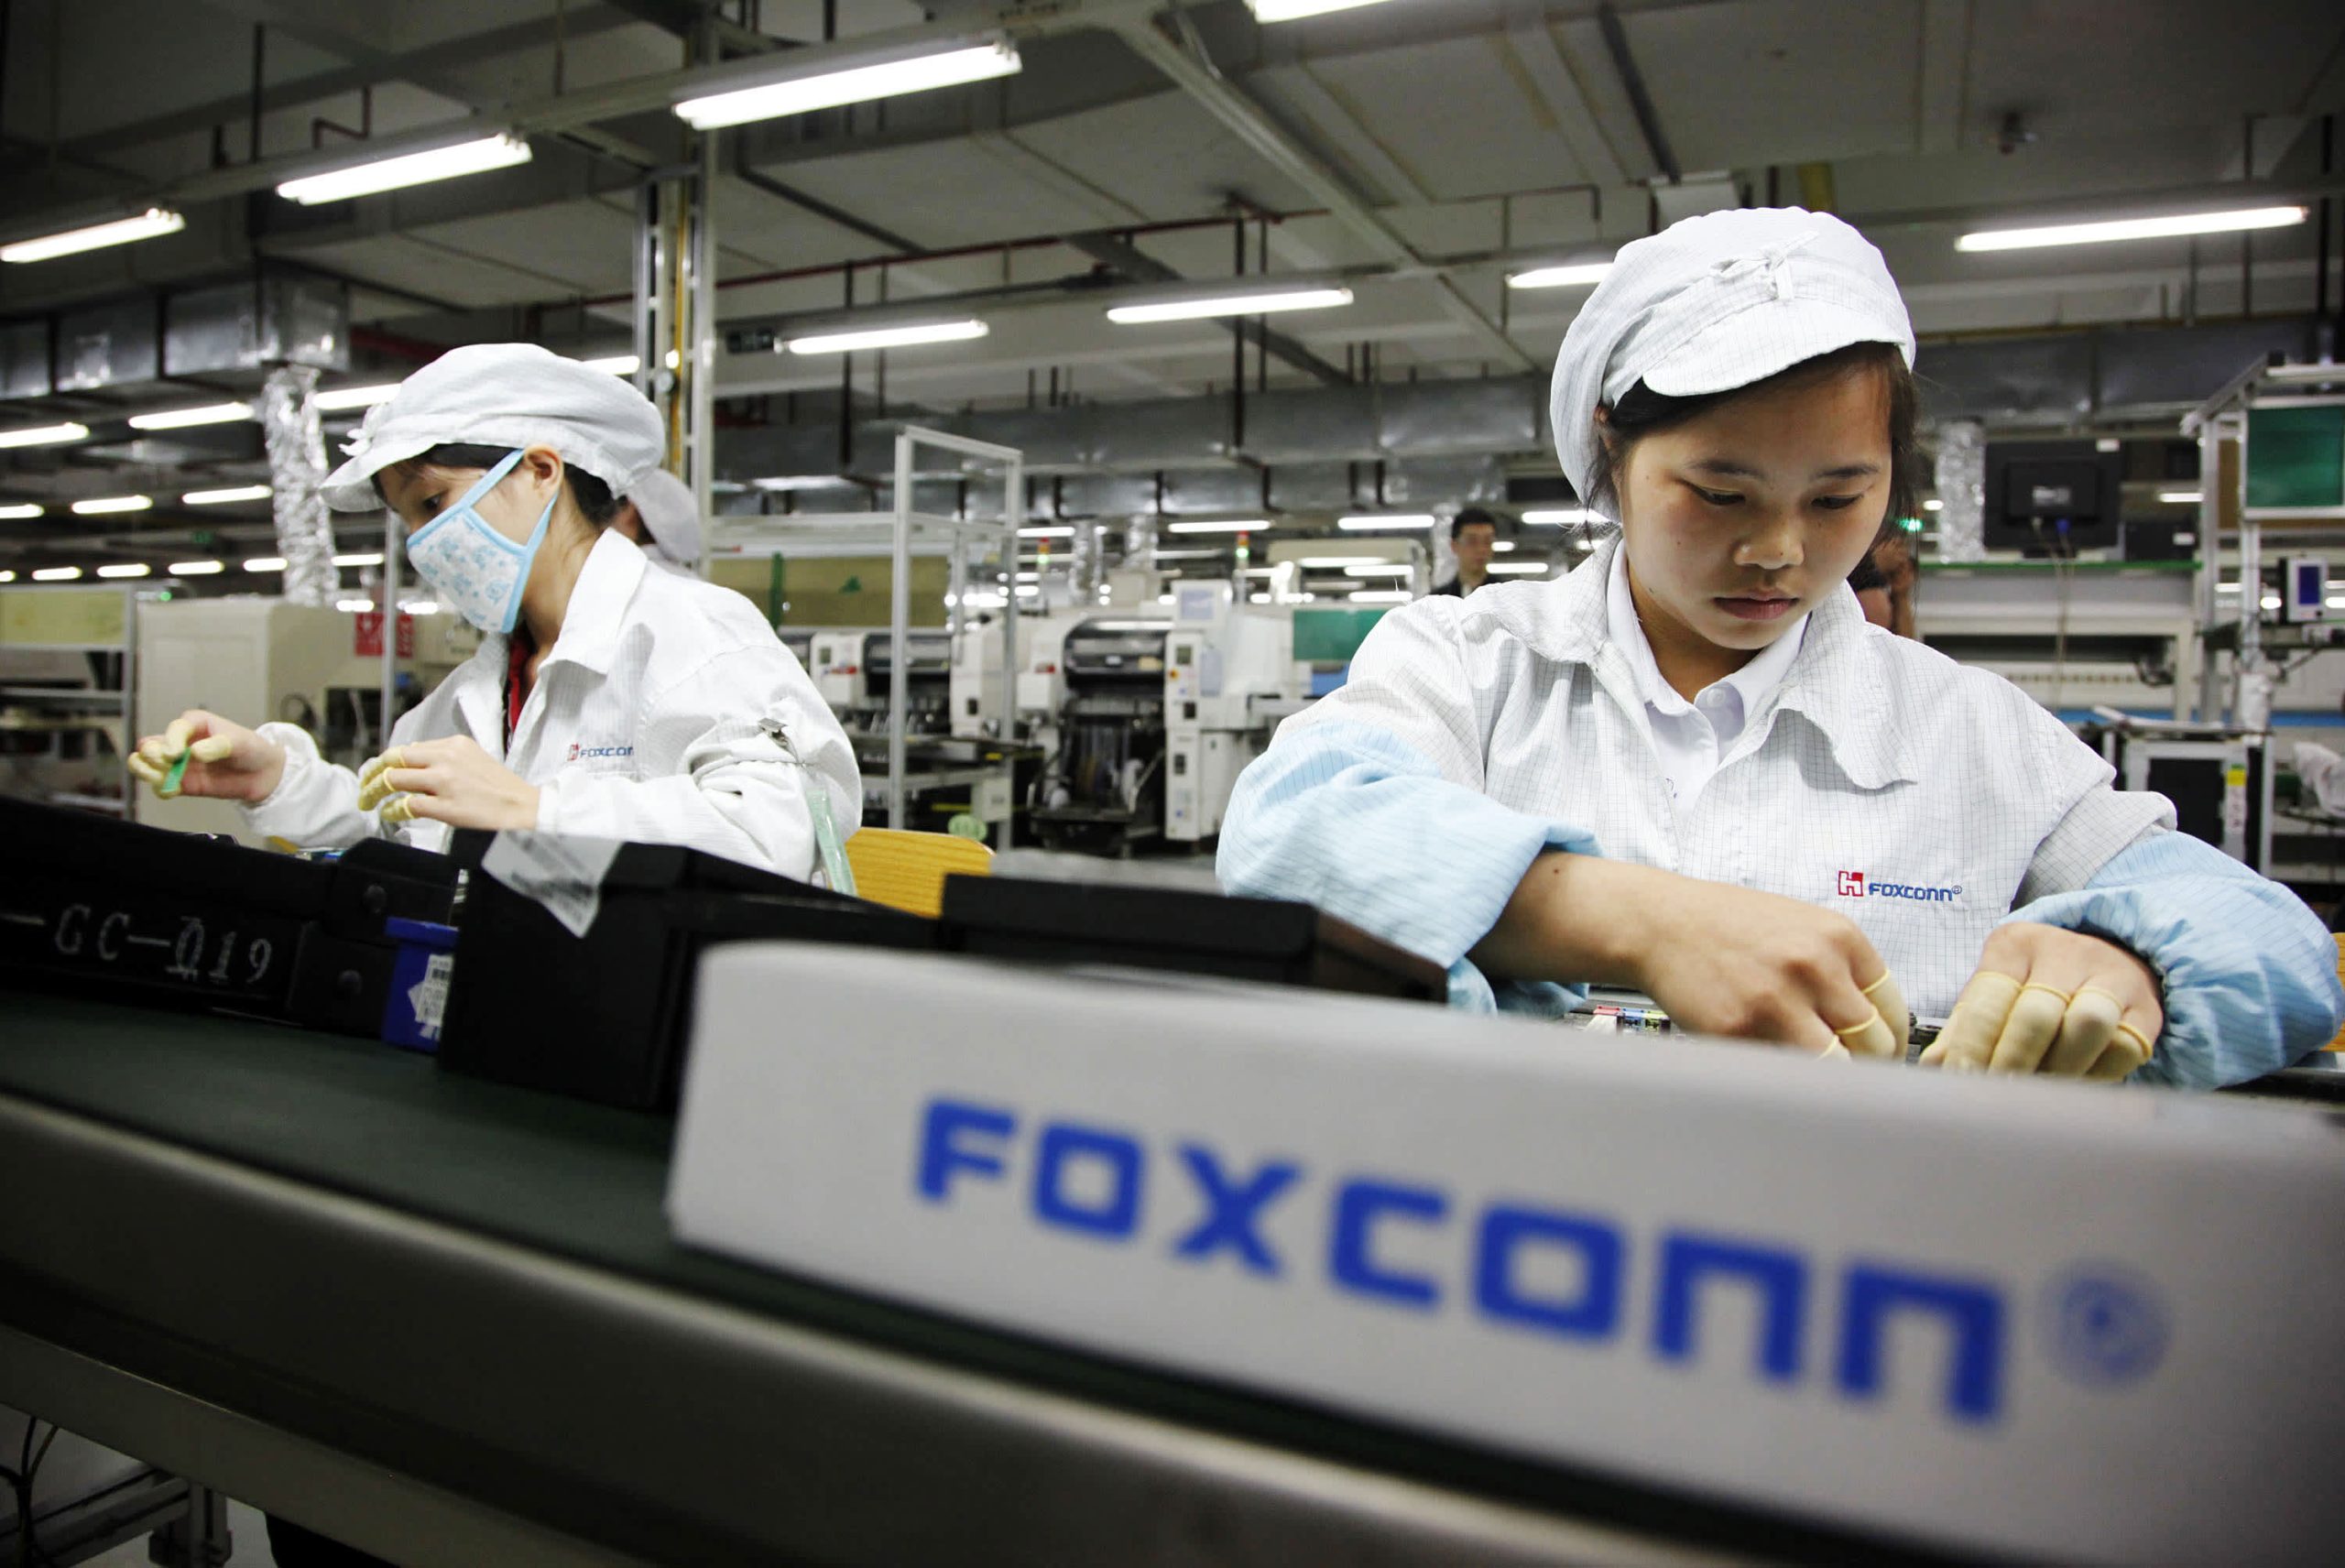 100642777-foxconn-worker-assembly-line-gettyp